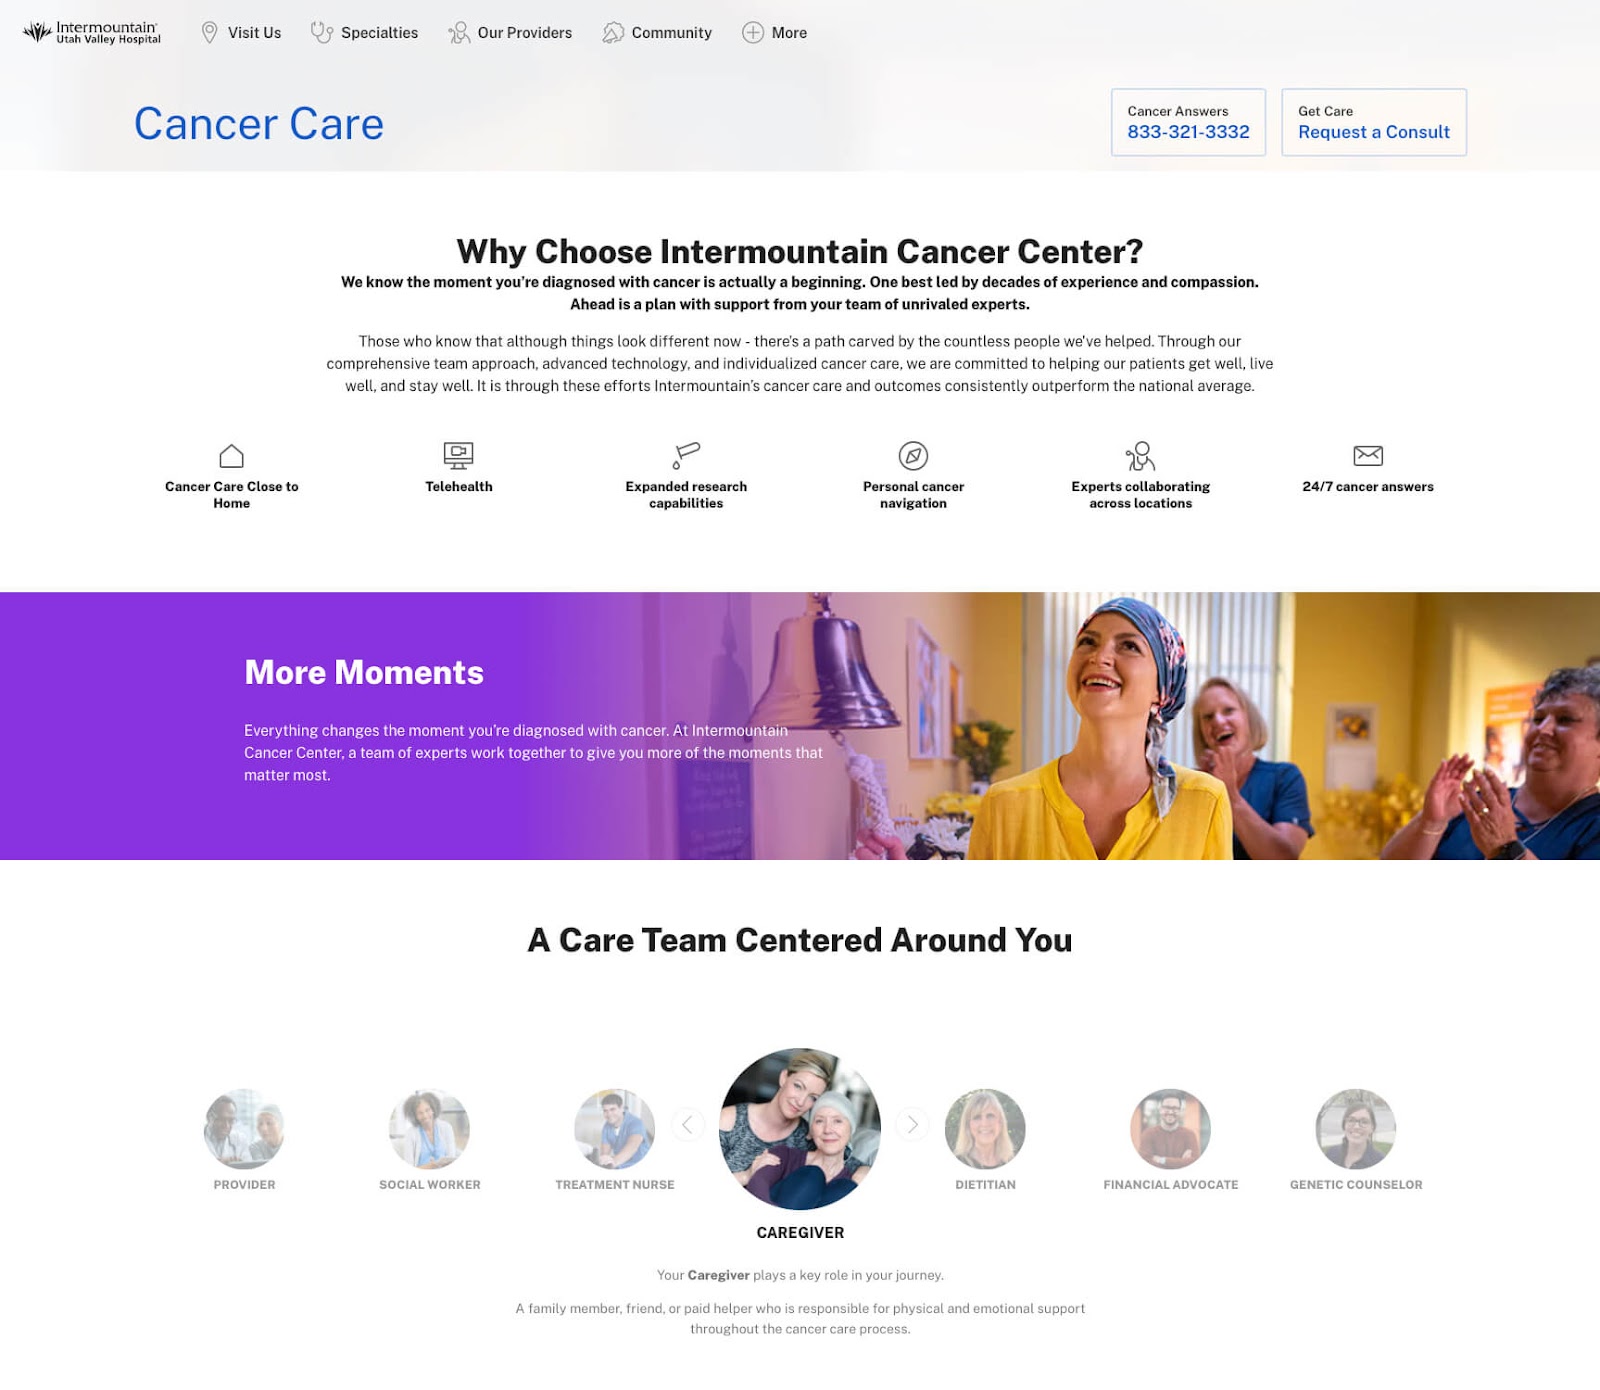 Intermountain Utah Valley Hospital's cancer center service page